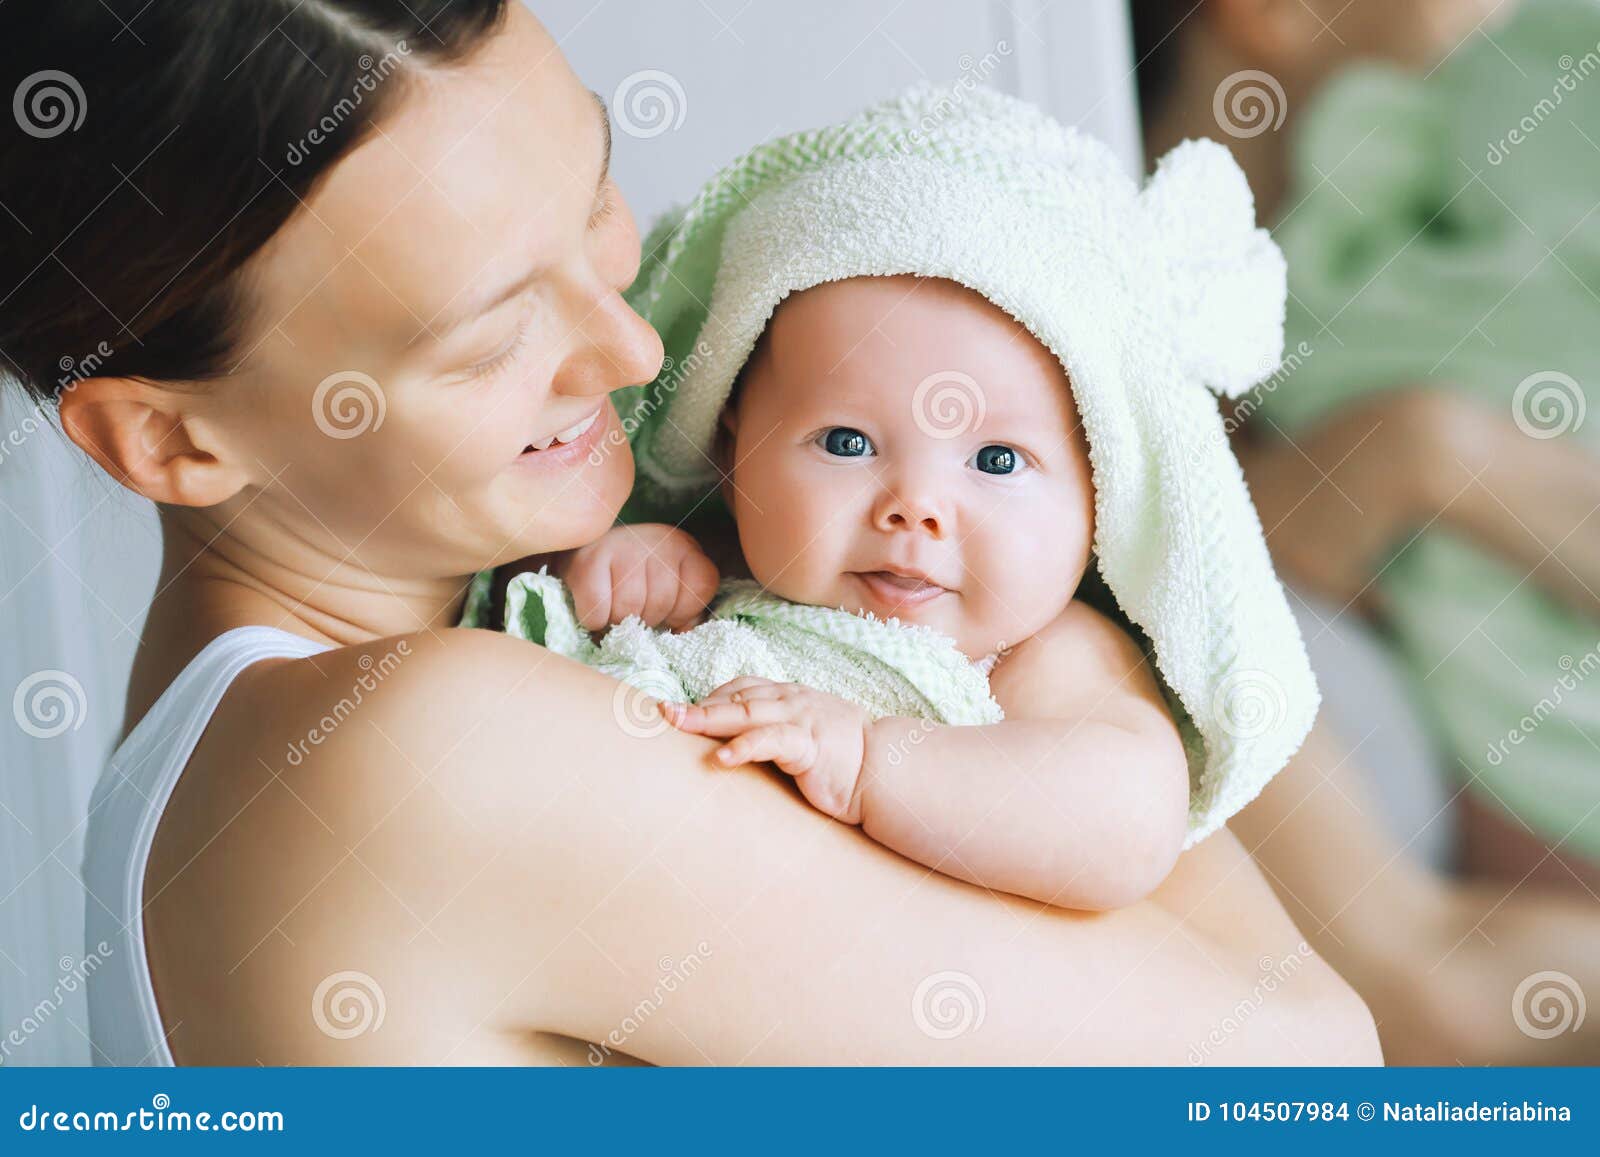 cutest baby after bath with towel on head.